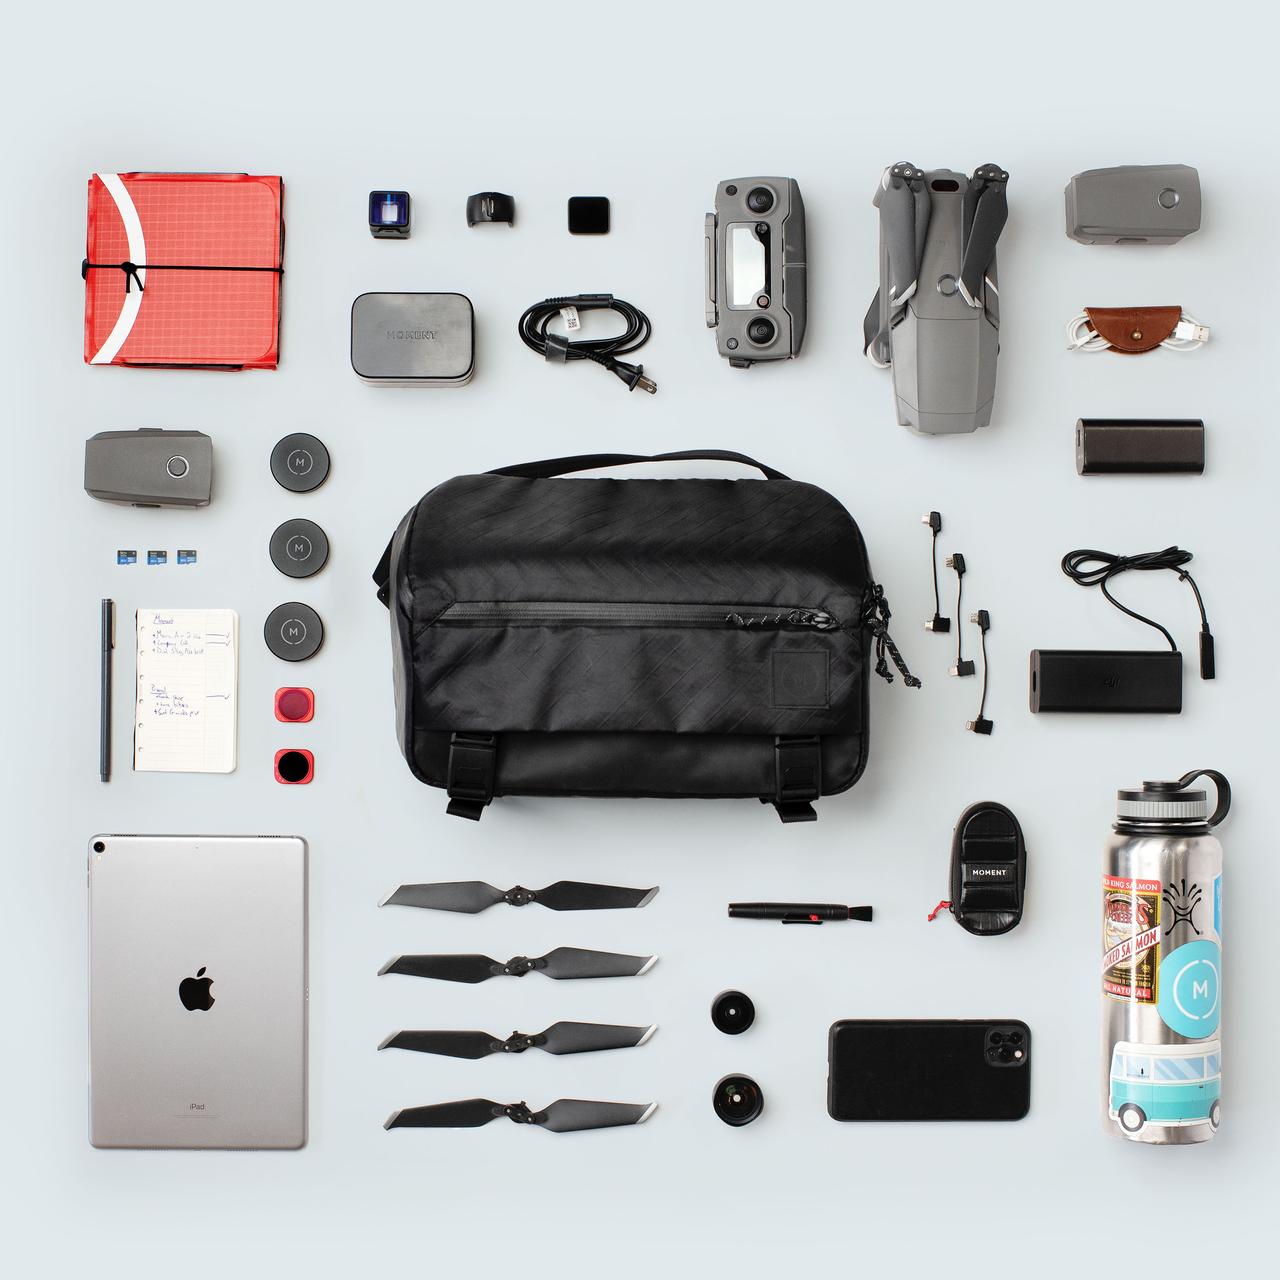 Moment 10 L sling flatlay drone 02